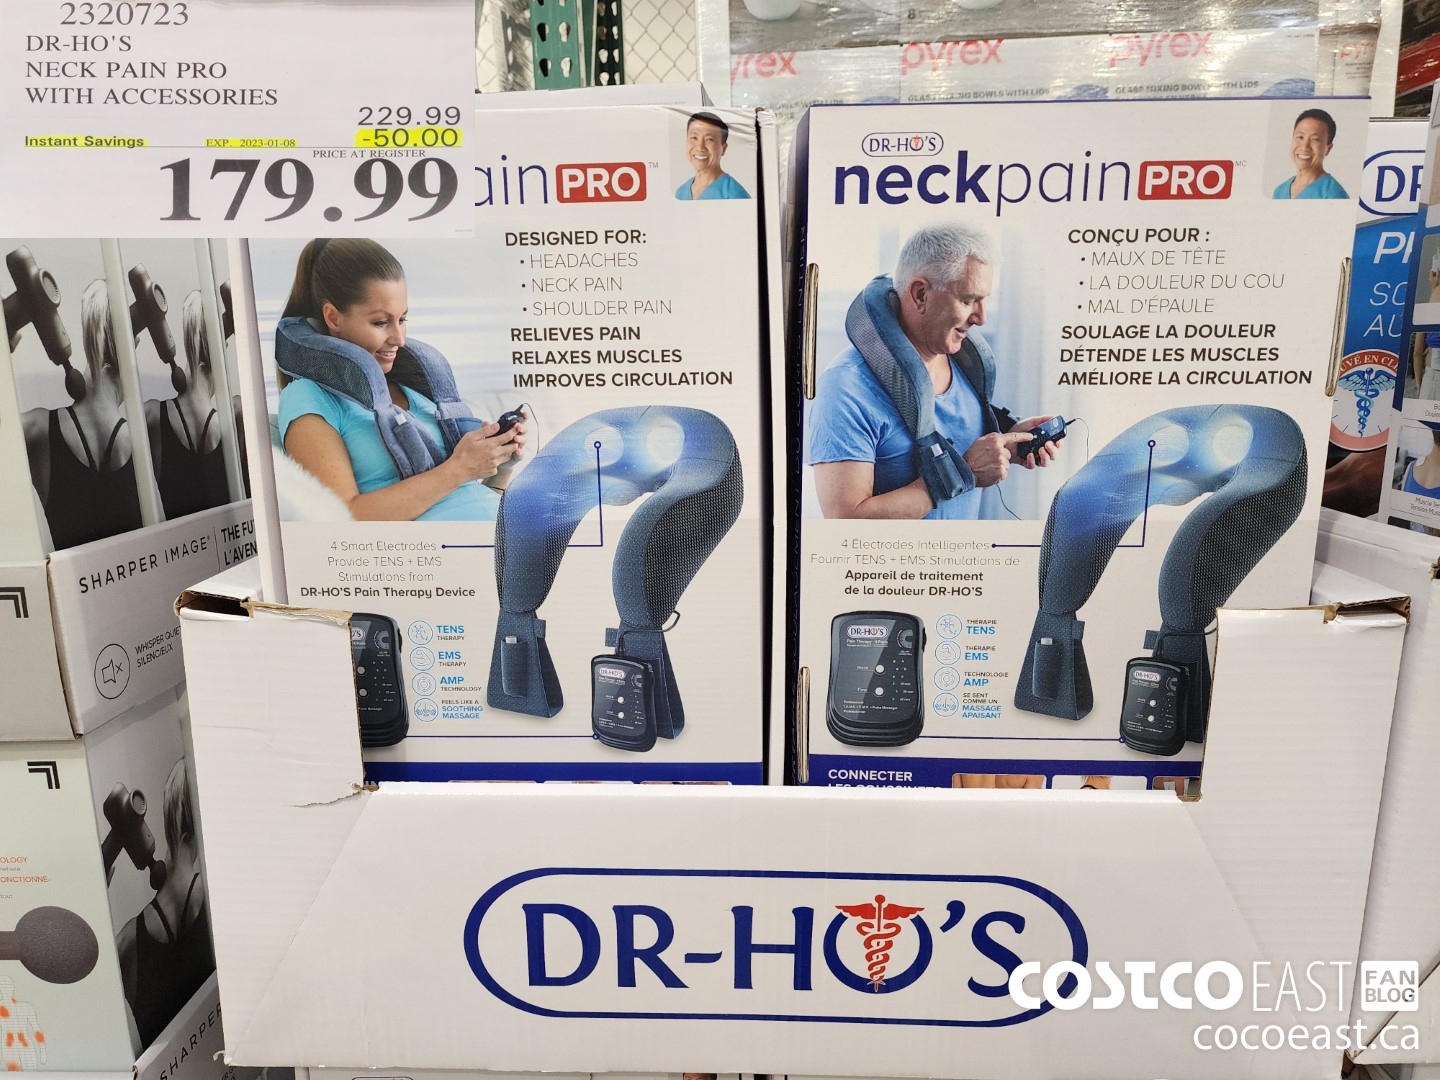 2320723 DR HO S NECK PAIN PRO WITH ACCESSORIES 50 00 INSTANT